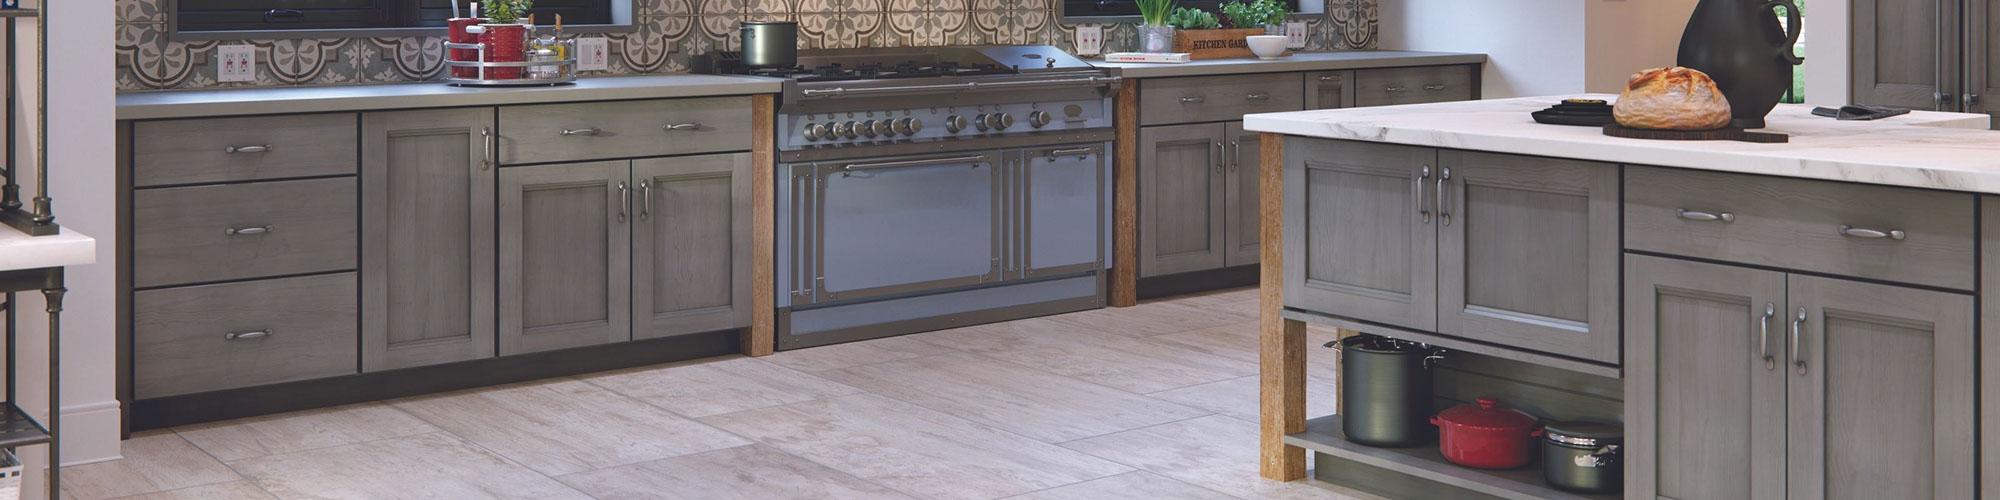 Country style kitchen with gray & beige encaustic wall tile, floor tile that looks like wood, and gray porcelain slab countertops.